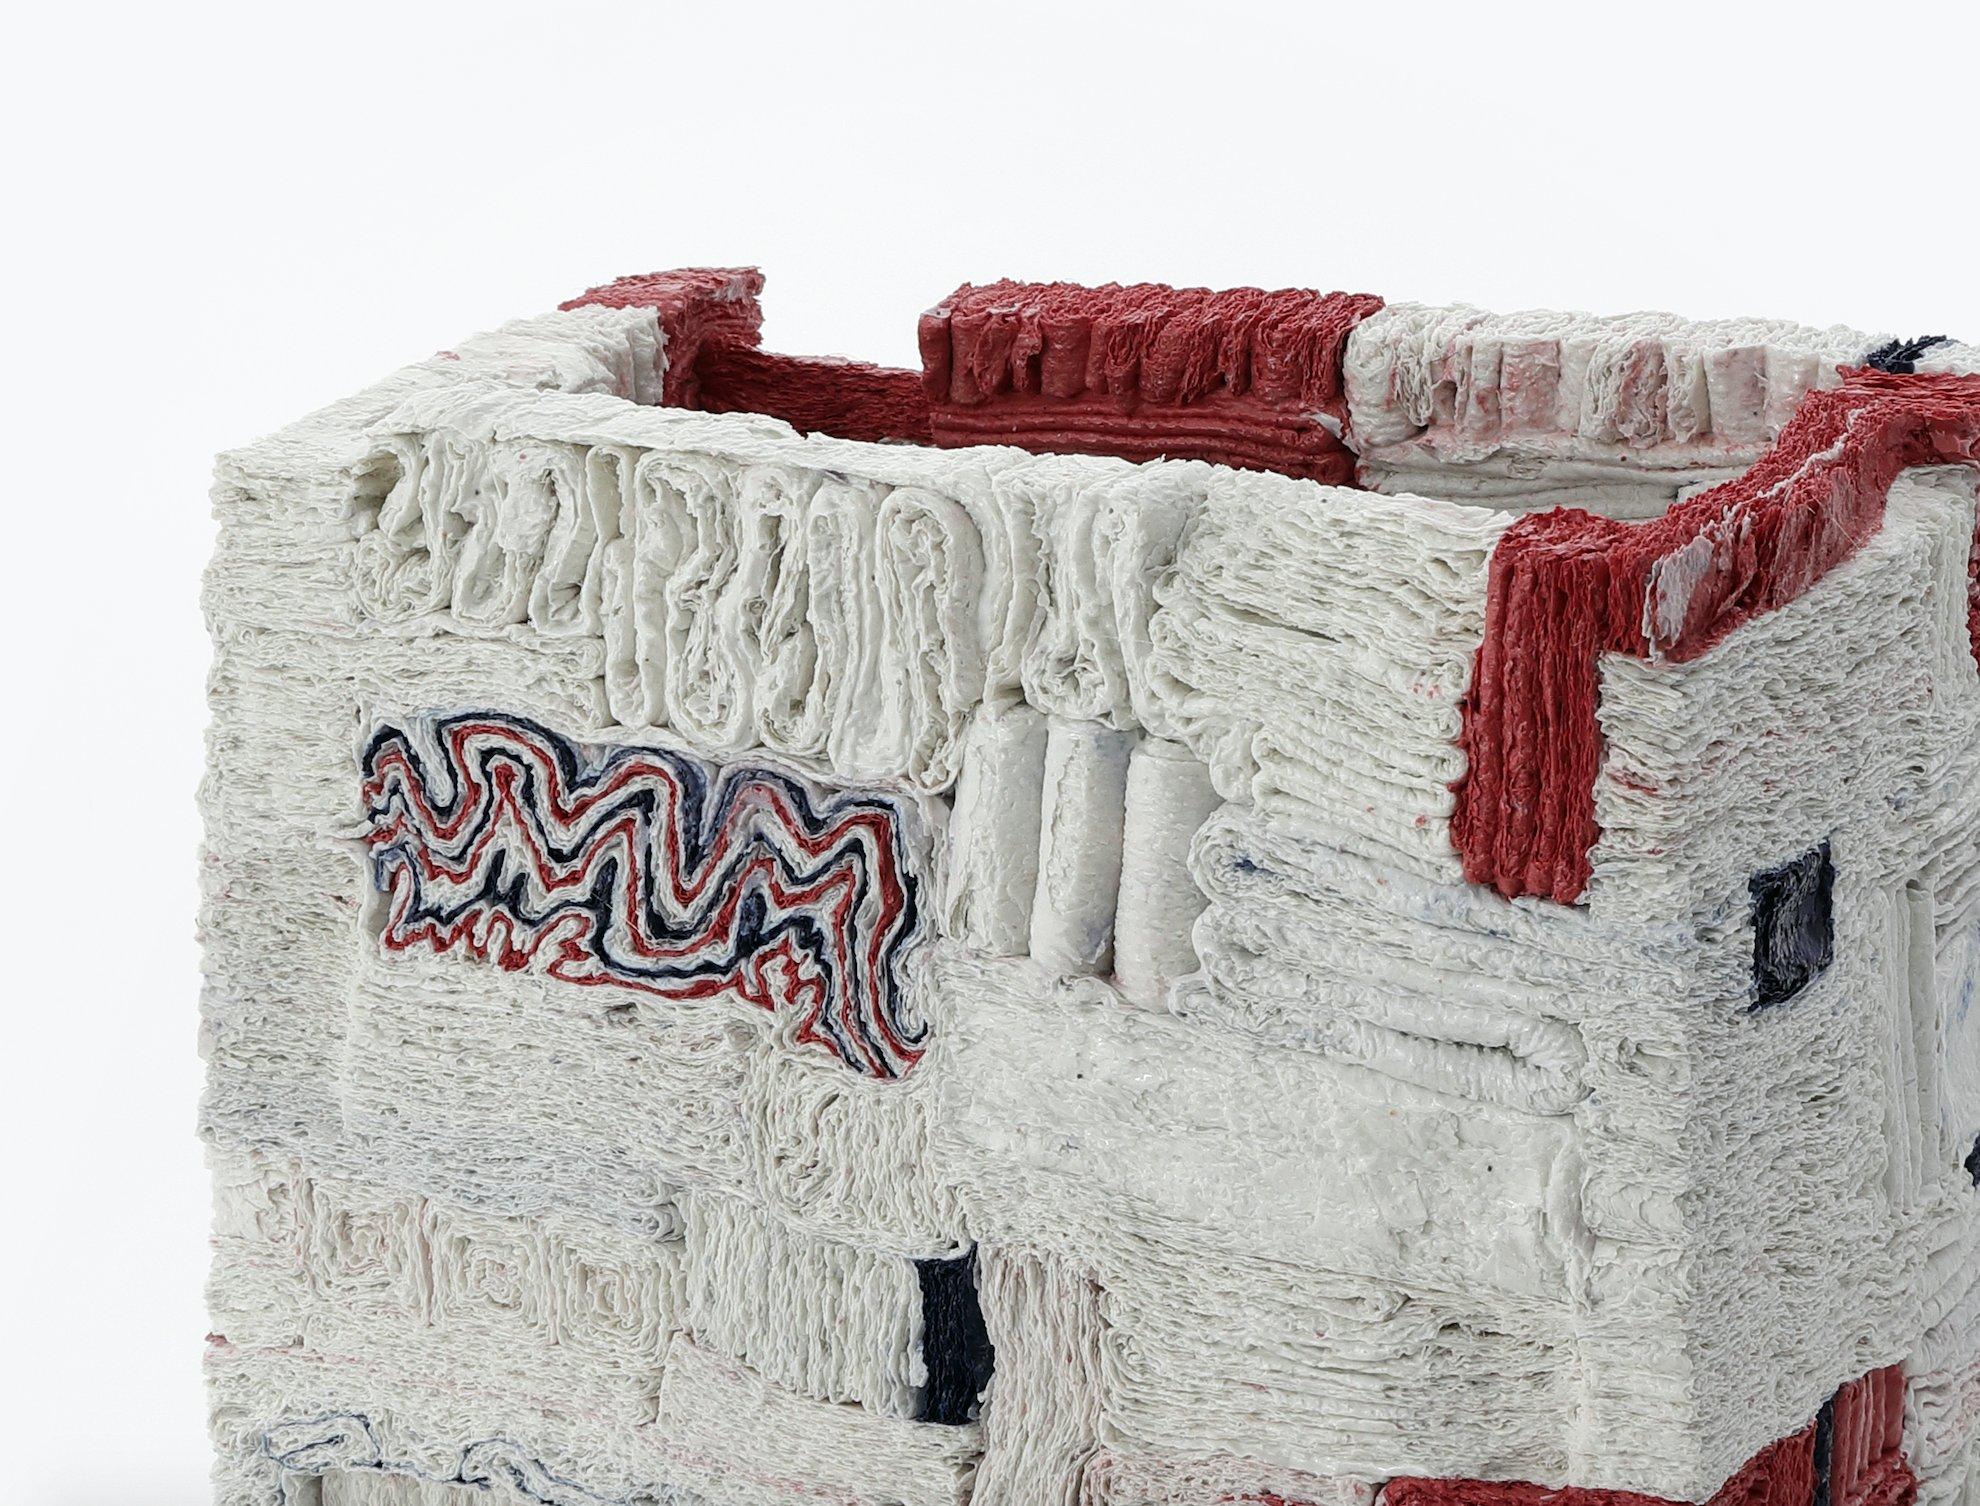 Red and White Patchwork, 2023 (Ceramic, C. 11.4 in. h x 9.8 in. w x 6.6 in. d, Object No.: 4204)

Jongjin Park was born in South Korea in 1982 and lives and works in Seoul. He holds an MA in Ceramics from Cardiff University in the UK and is the